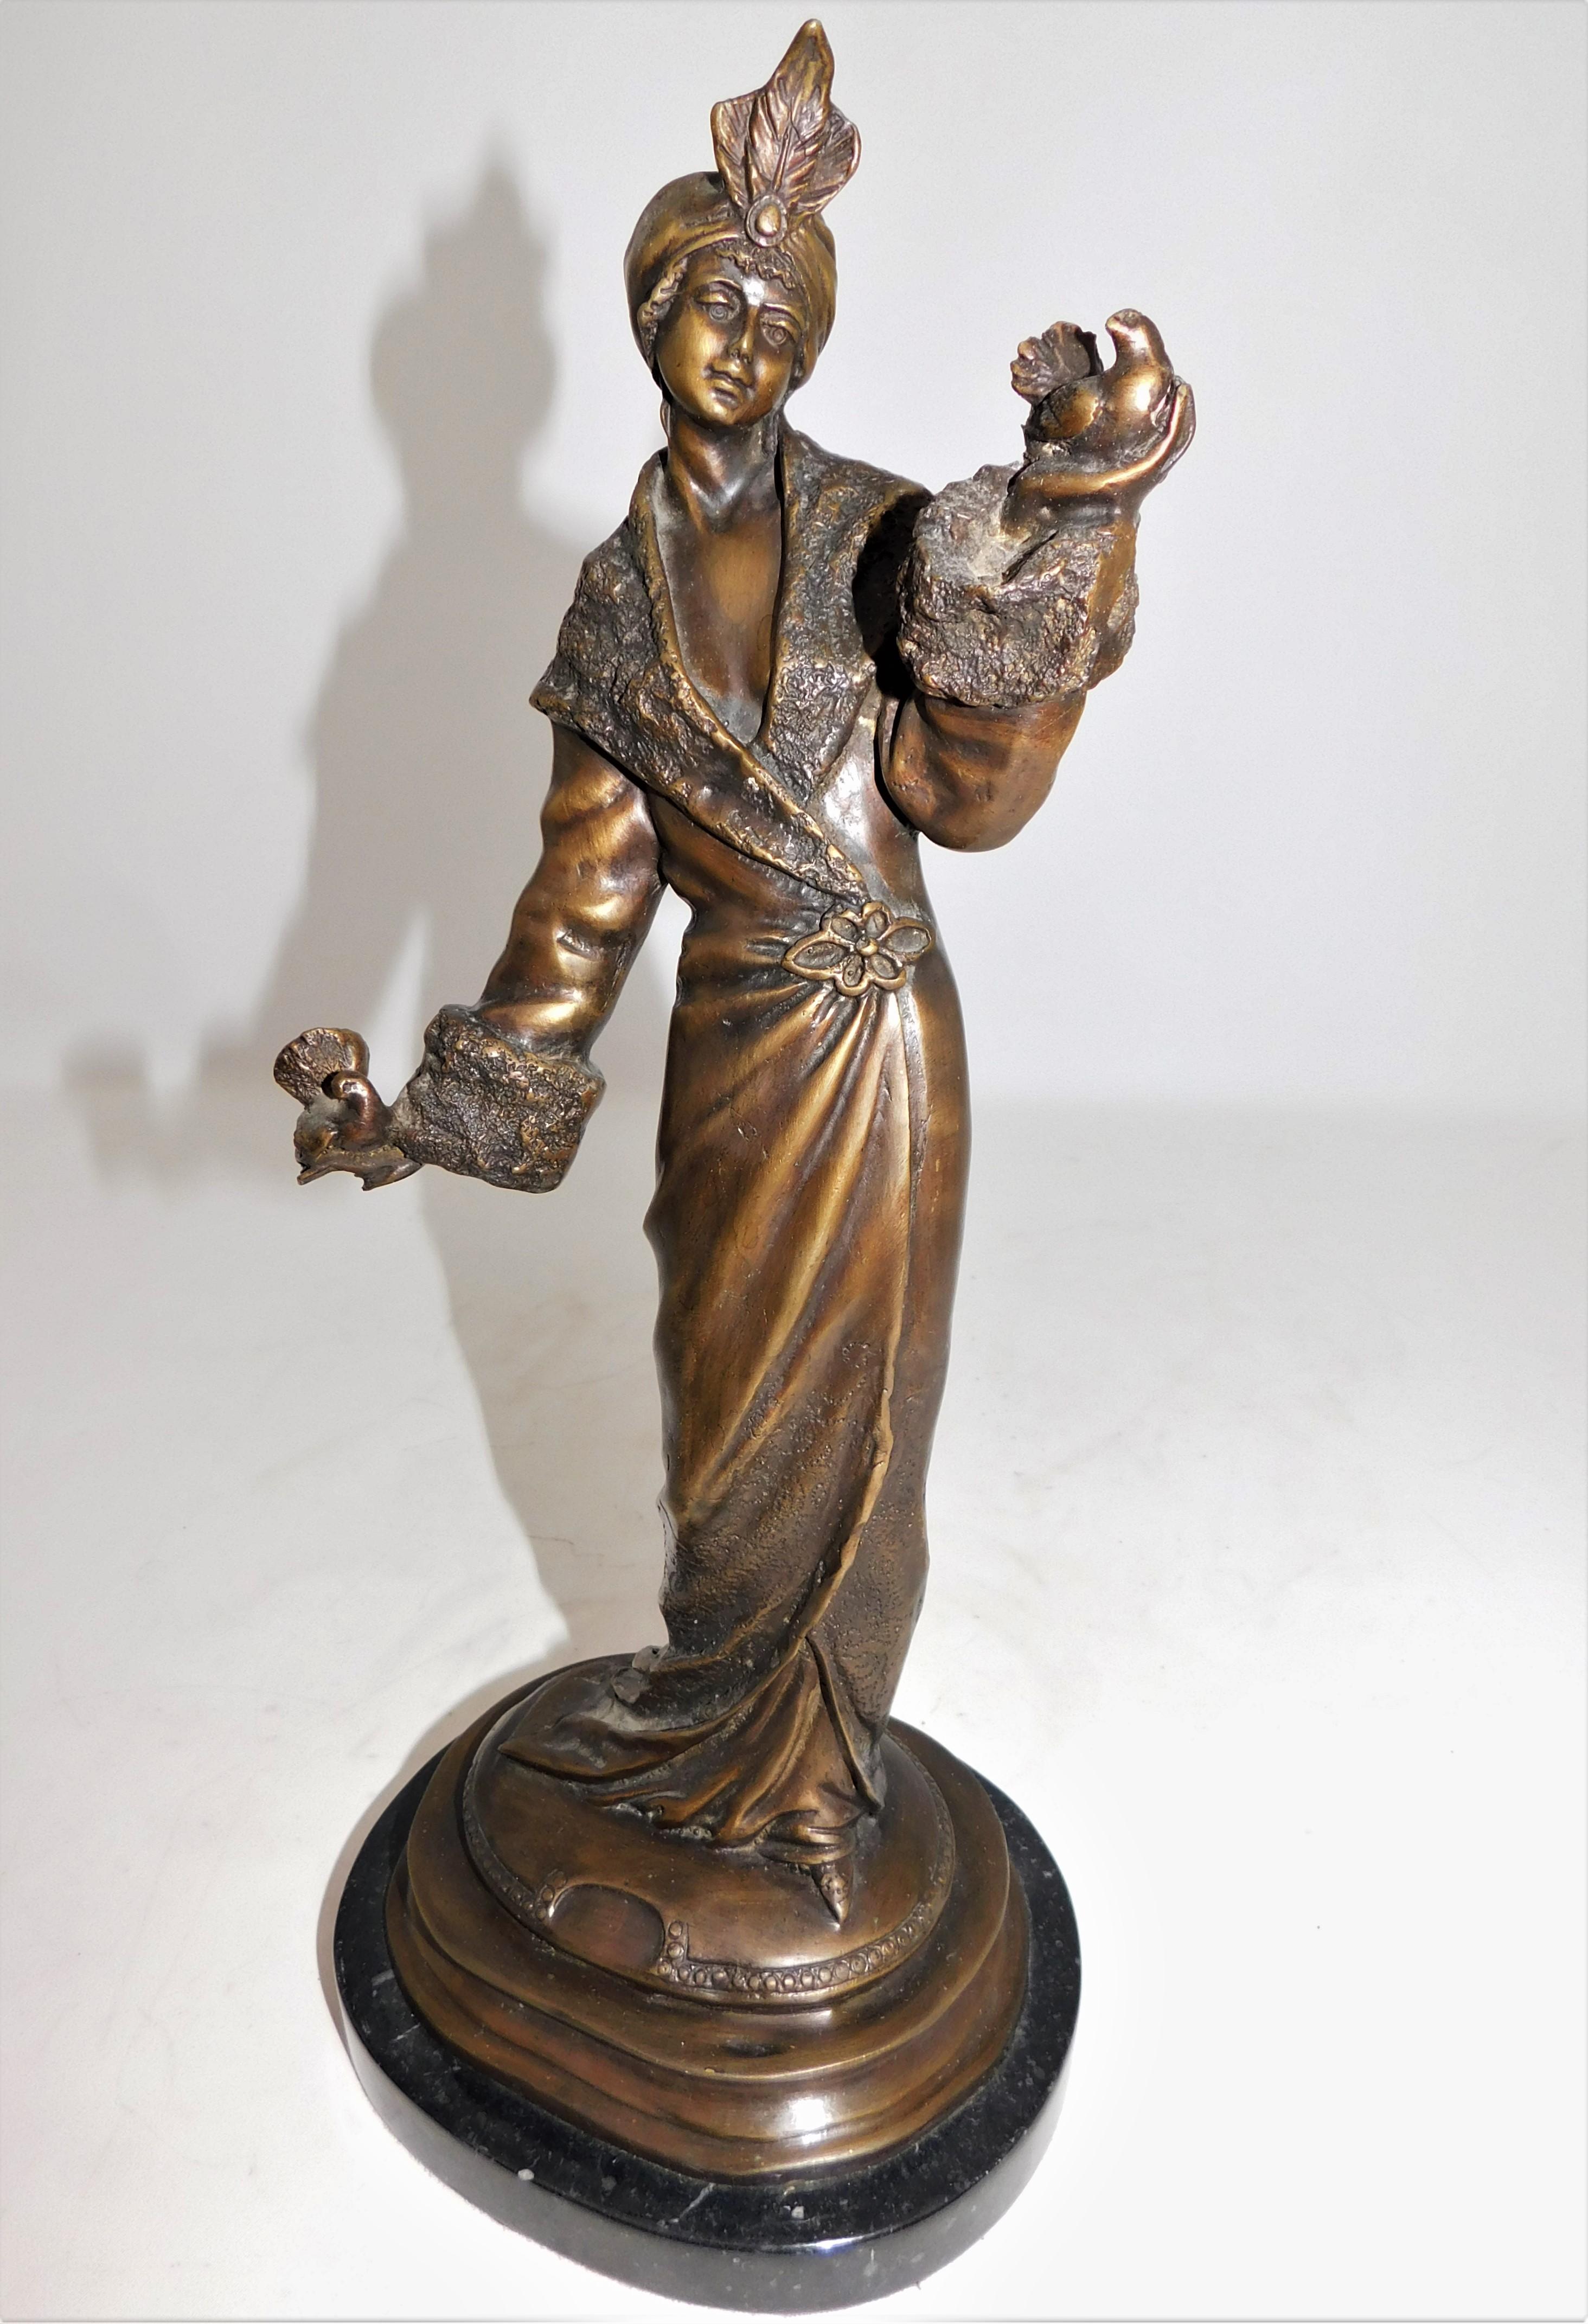 Bronze Art Deco Figurine Sculpture Woman with Doves in Flowing Dress on Marble For Sale 5